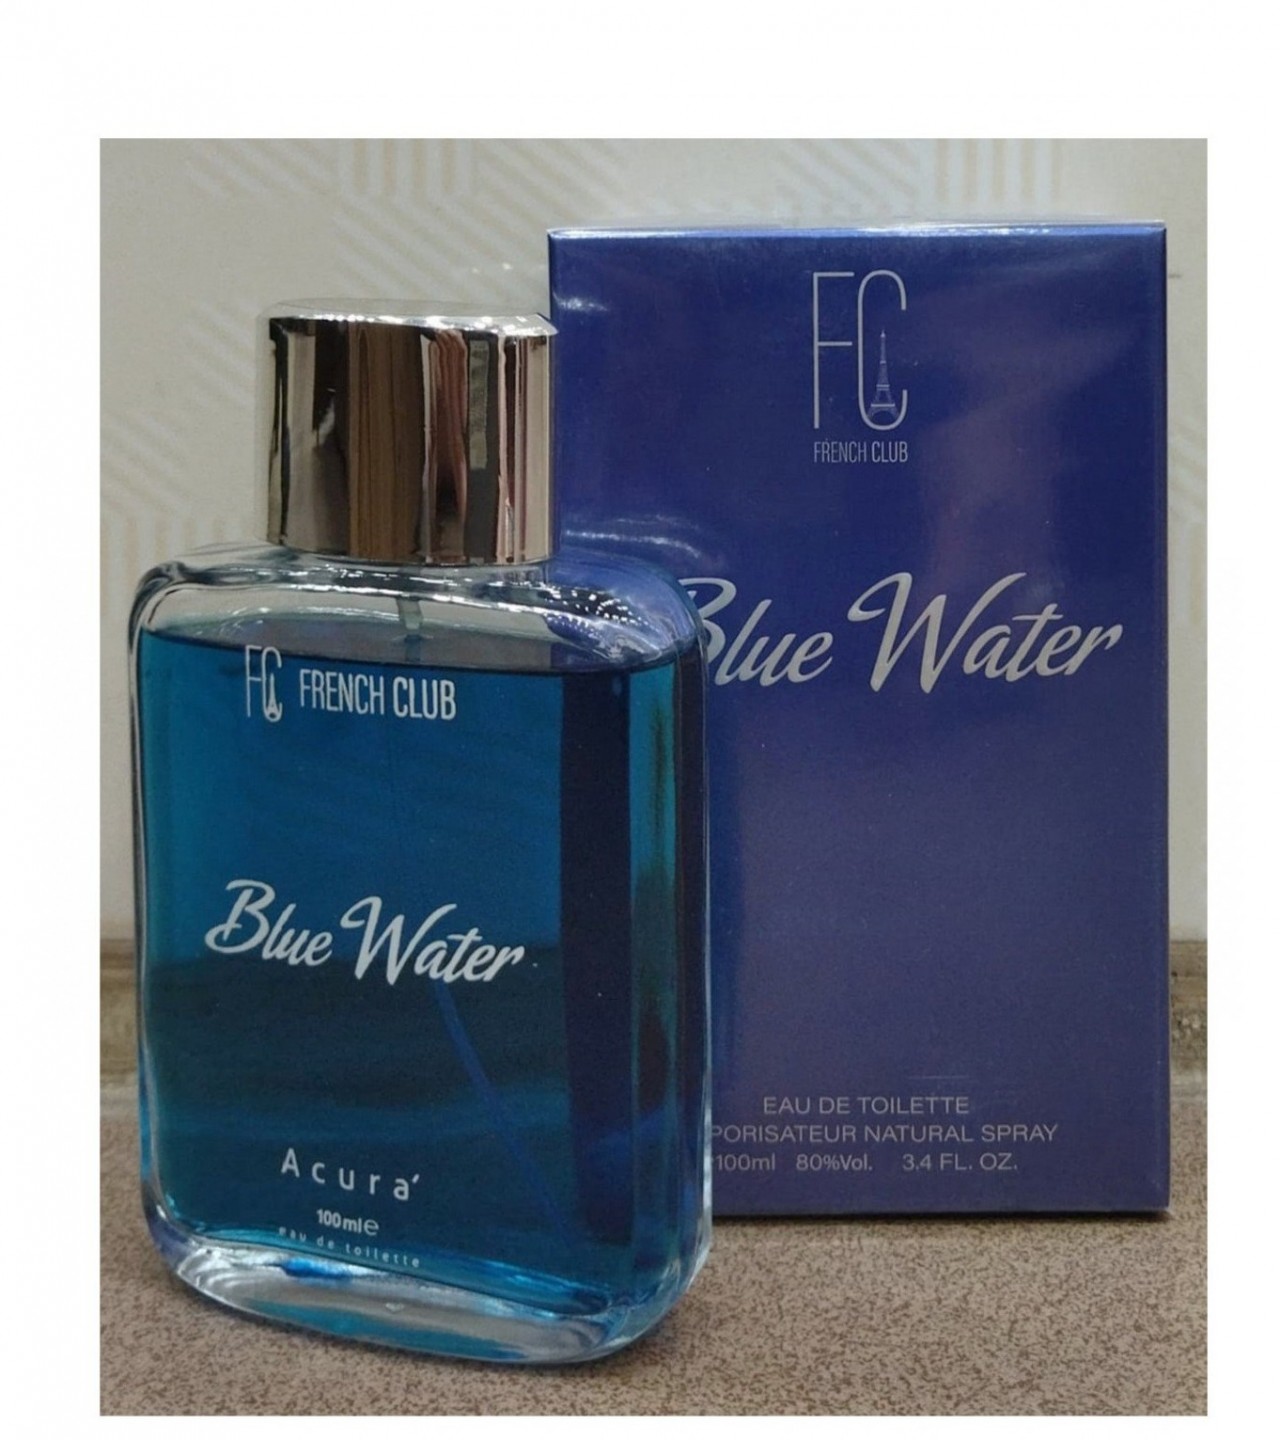 Acura French Club Blue Water Perfume For Men – EDT – 100 ml